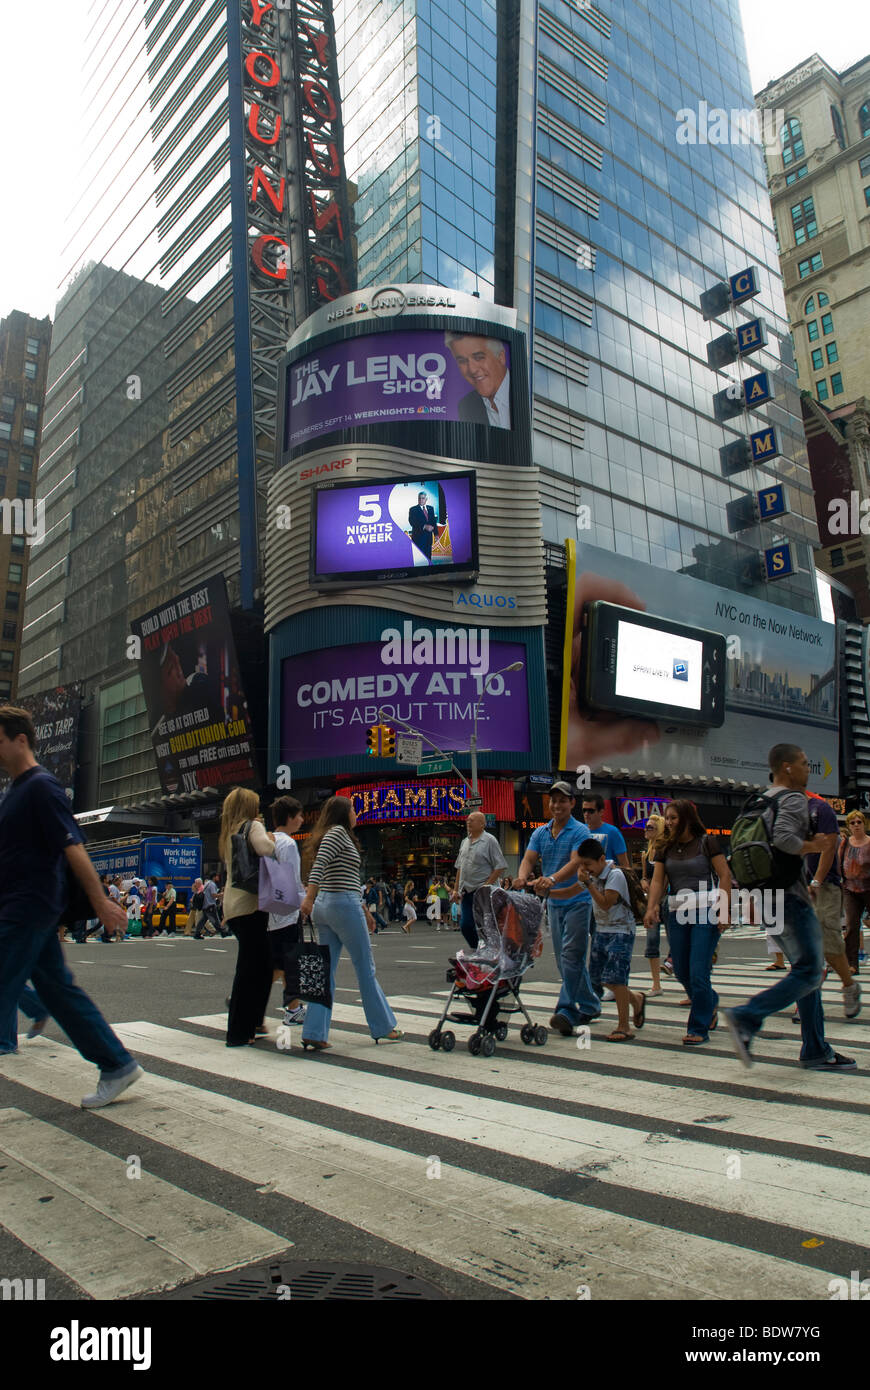 Advertising for the NBC television program, The Jay Leno Show on a billboard in Times Square in New York Stock Photo